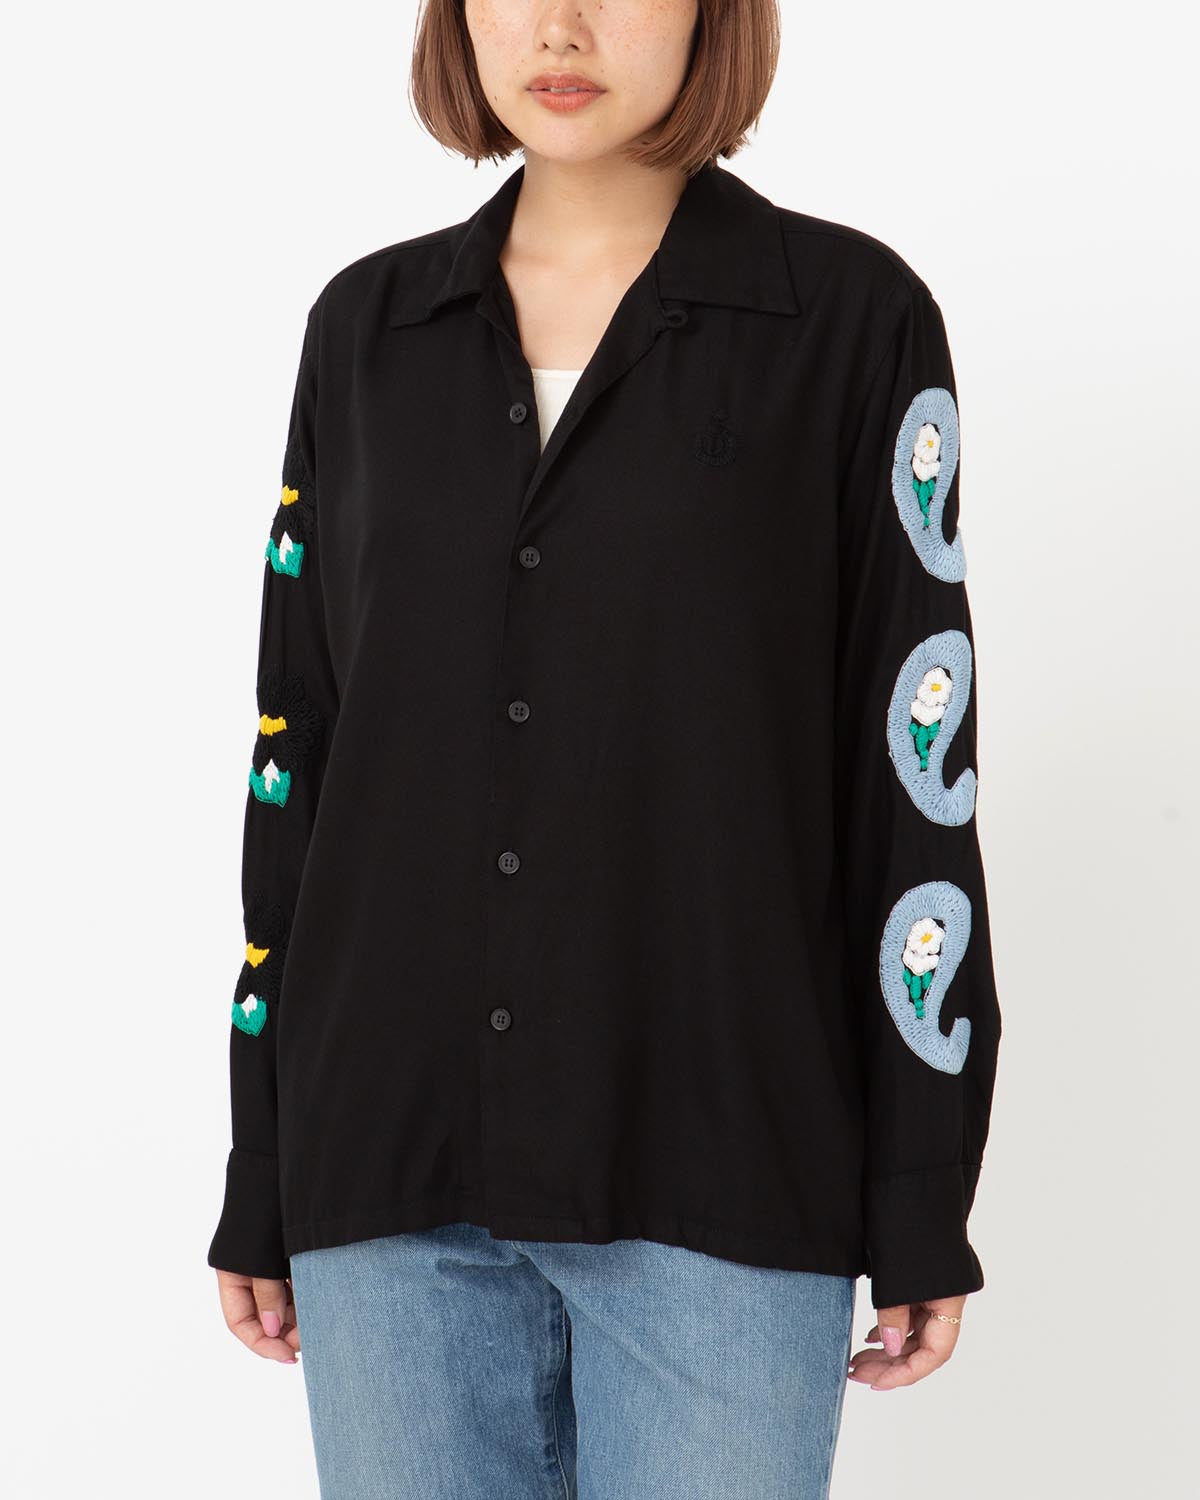 FLOWER & PAISLEY HAND EMBROIDERY SHIRT